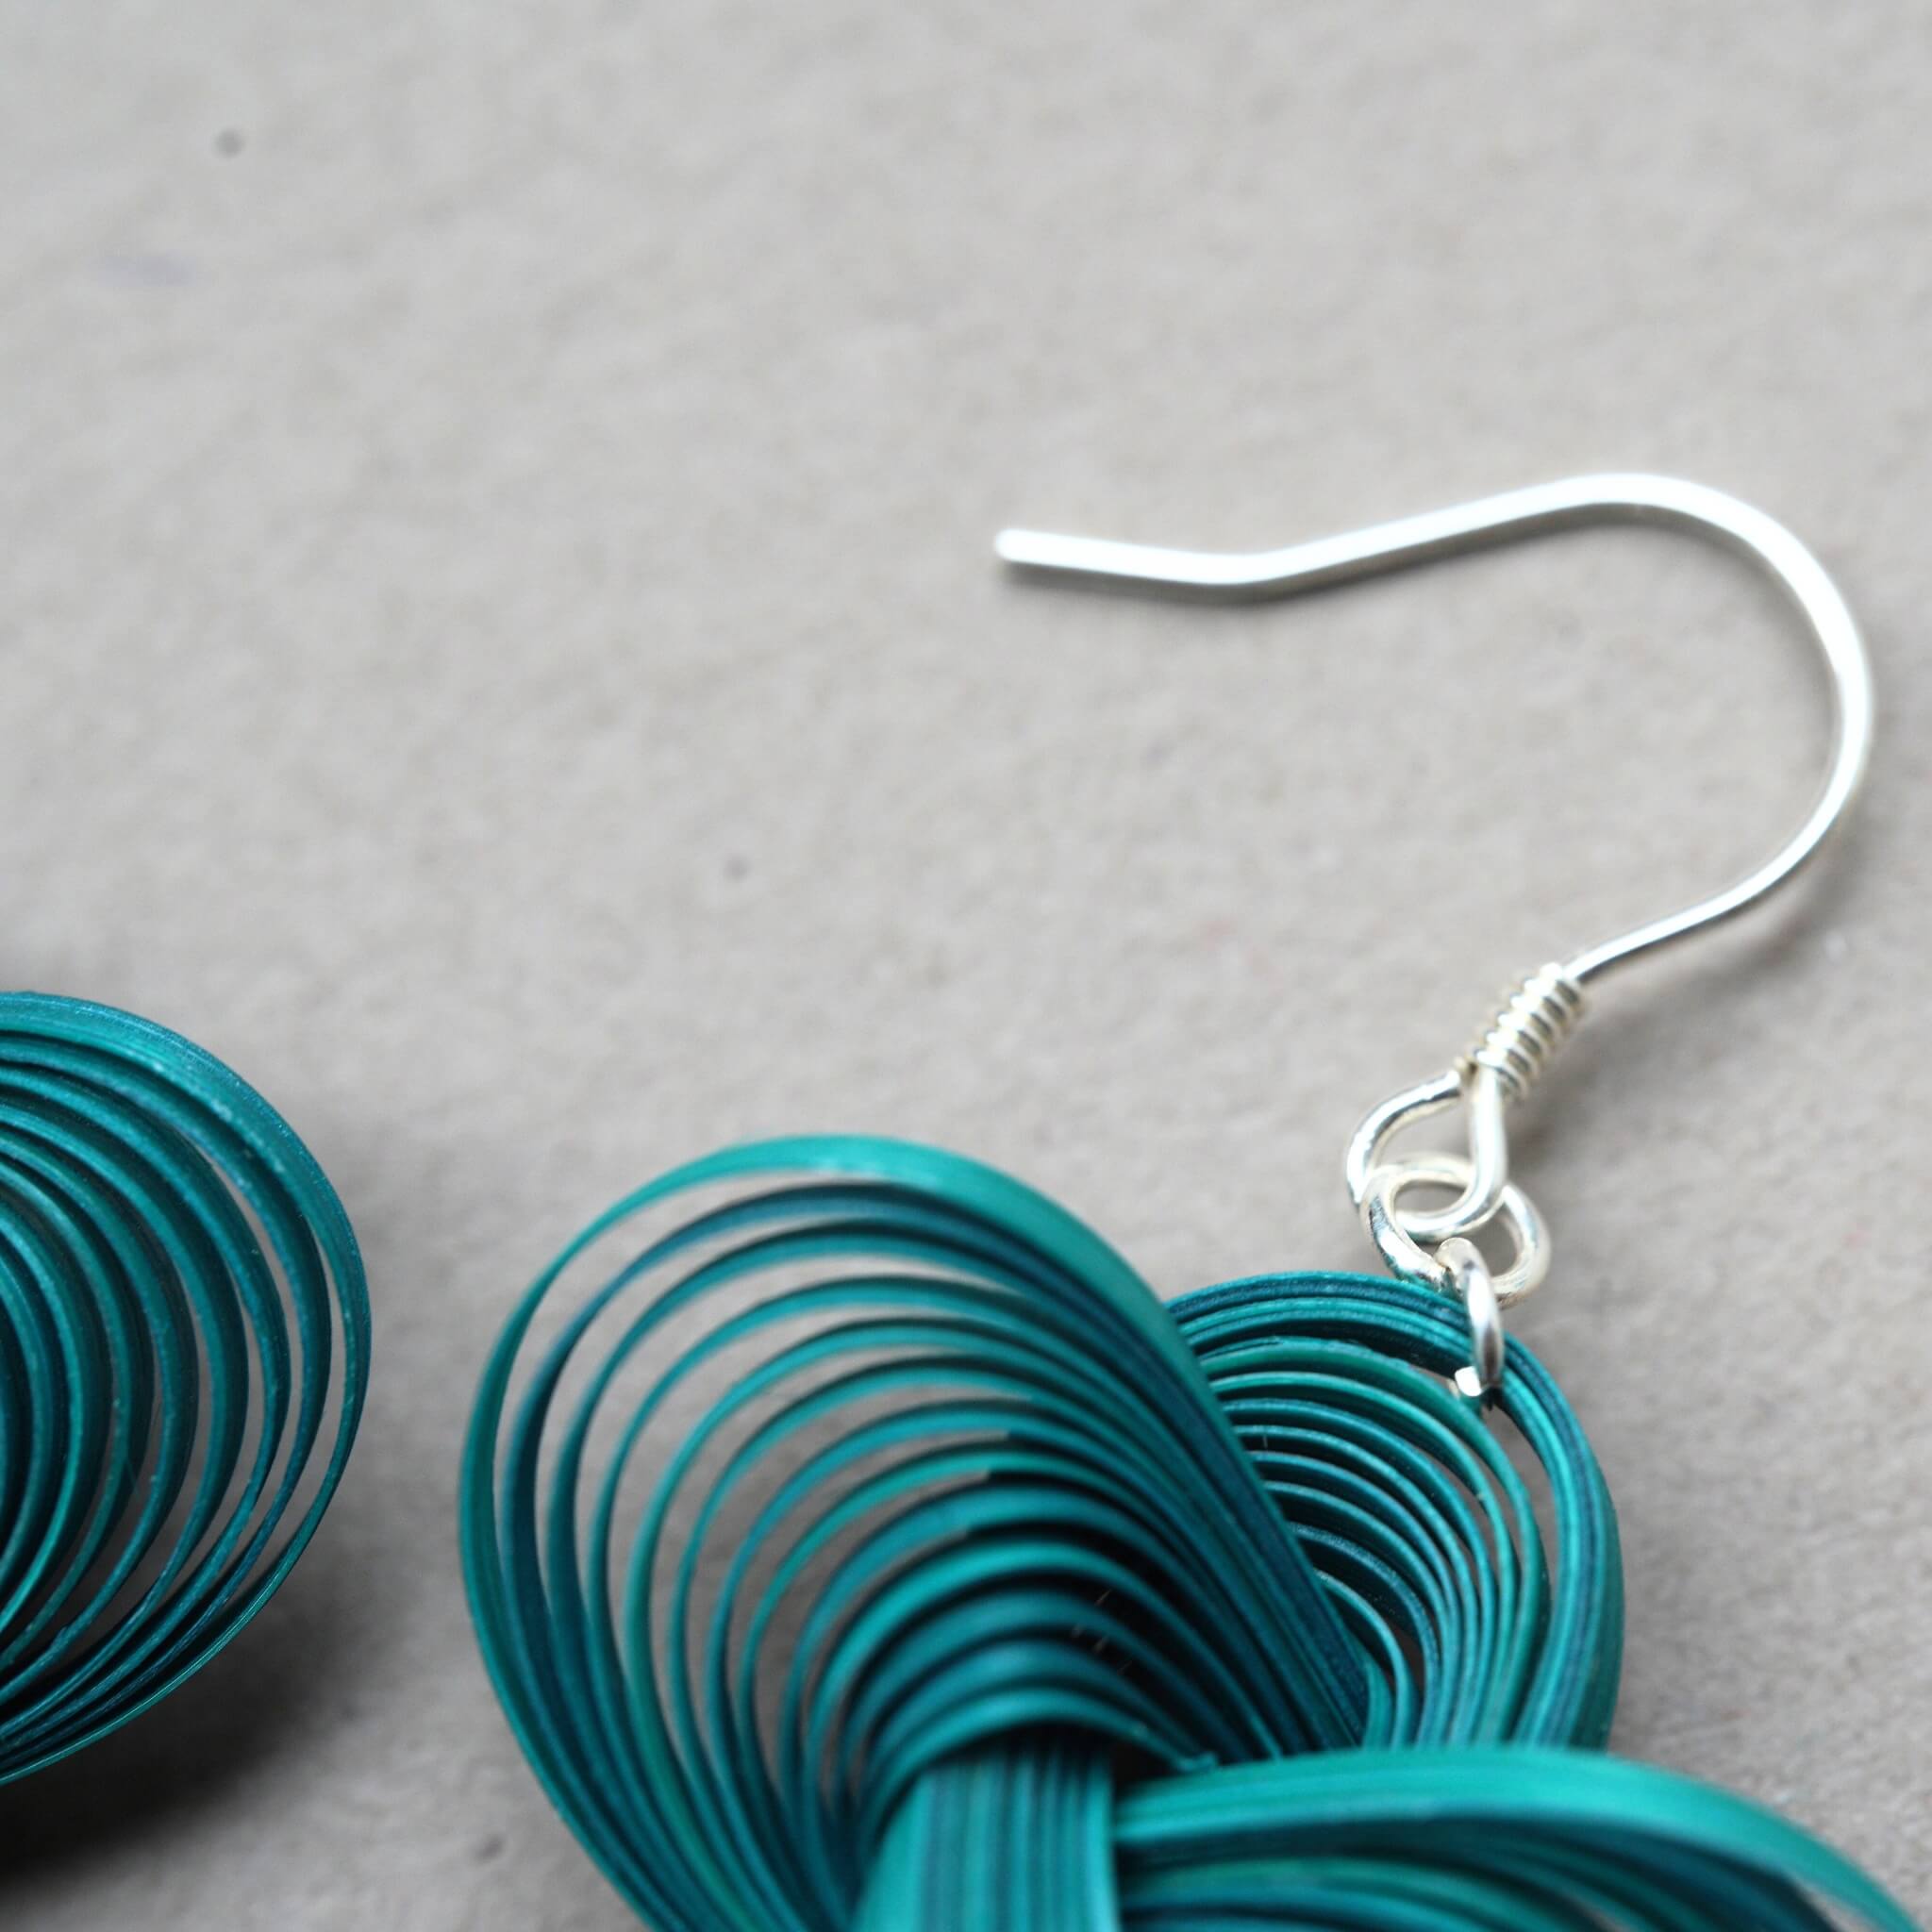 Bamboo-woven Earrings | Chinese Knot